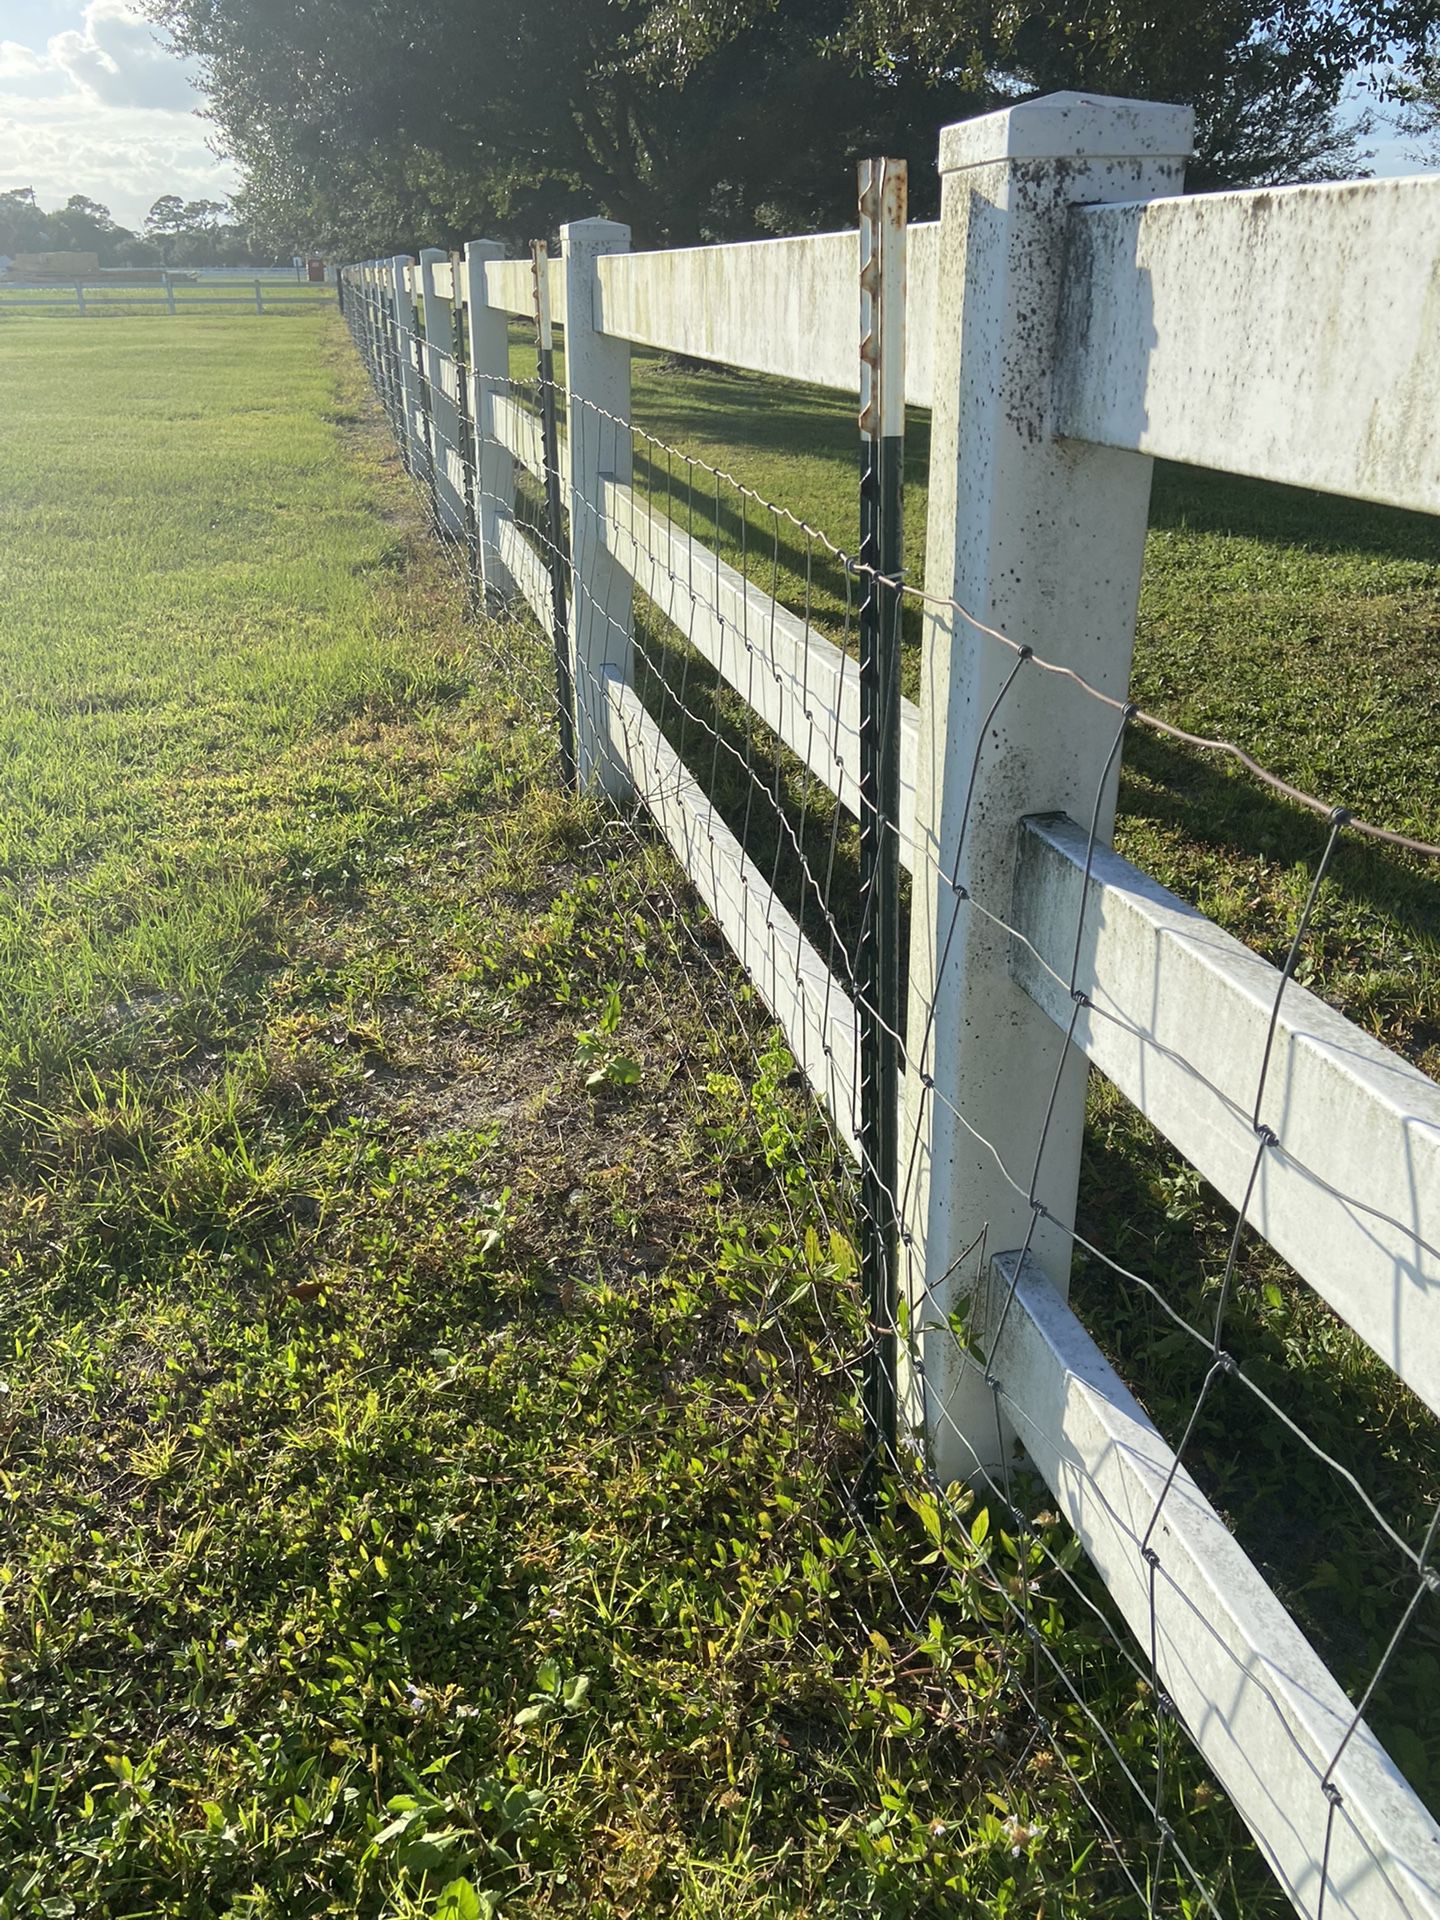 Approximately 550 feet of 3 ft field fence (4 inch mesh) Approximately 250 feet of 4 ft field fence (2 inch mesh) Approximately 120 steel 6 foot fence